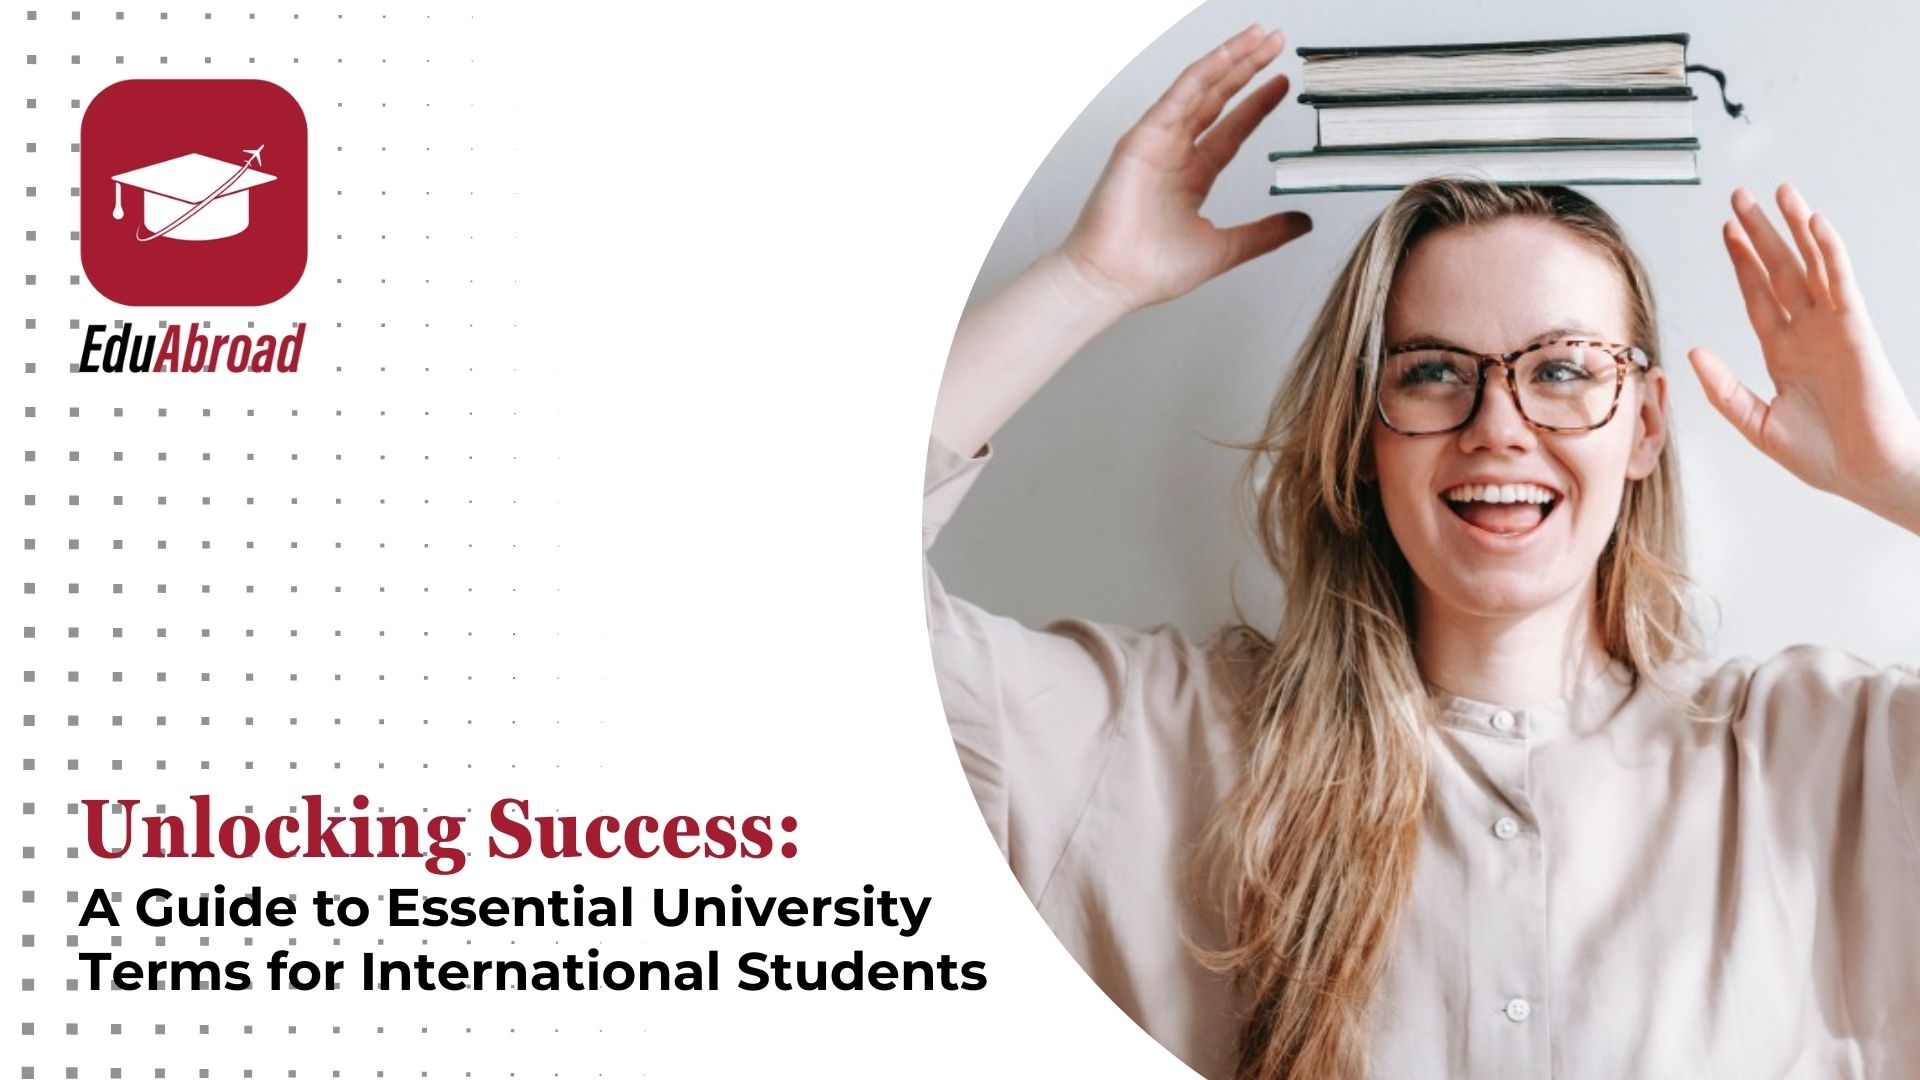 Unlocking Success: A Guide to Essential University Terms for International Students